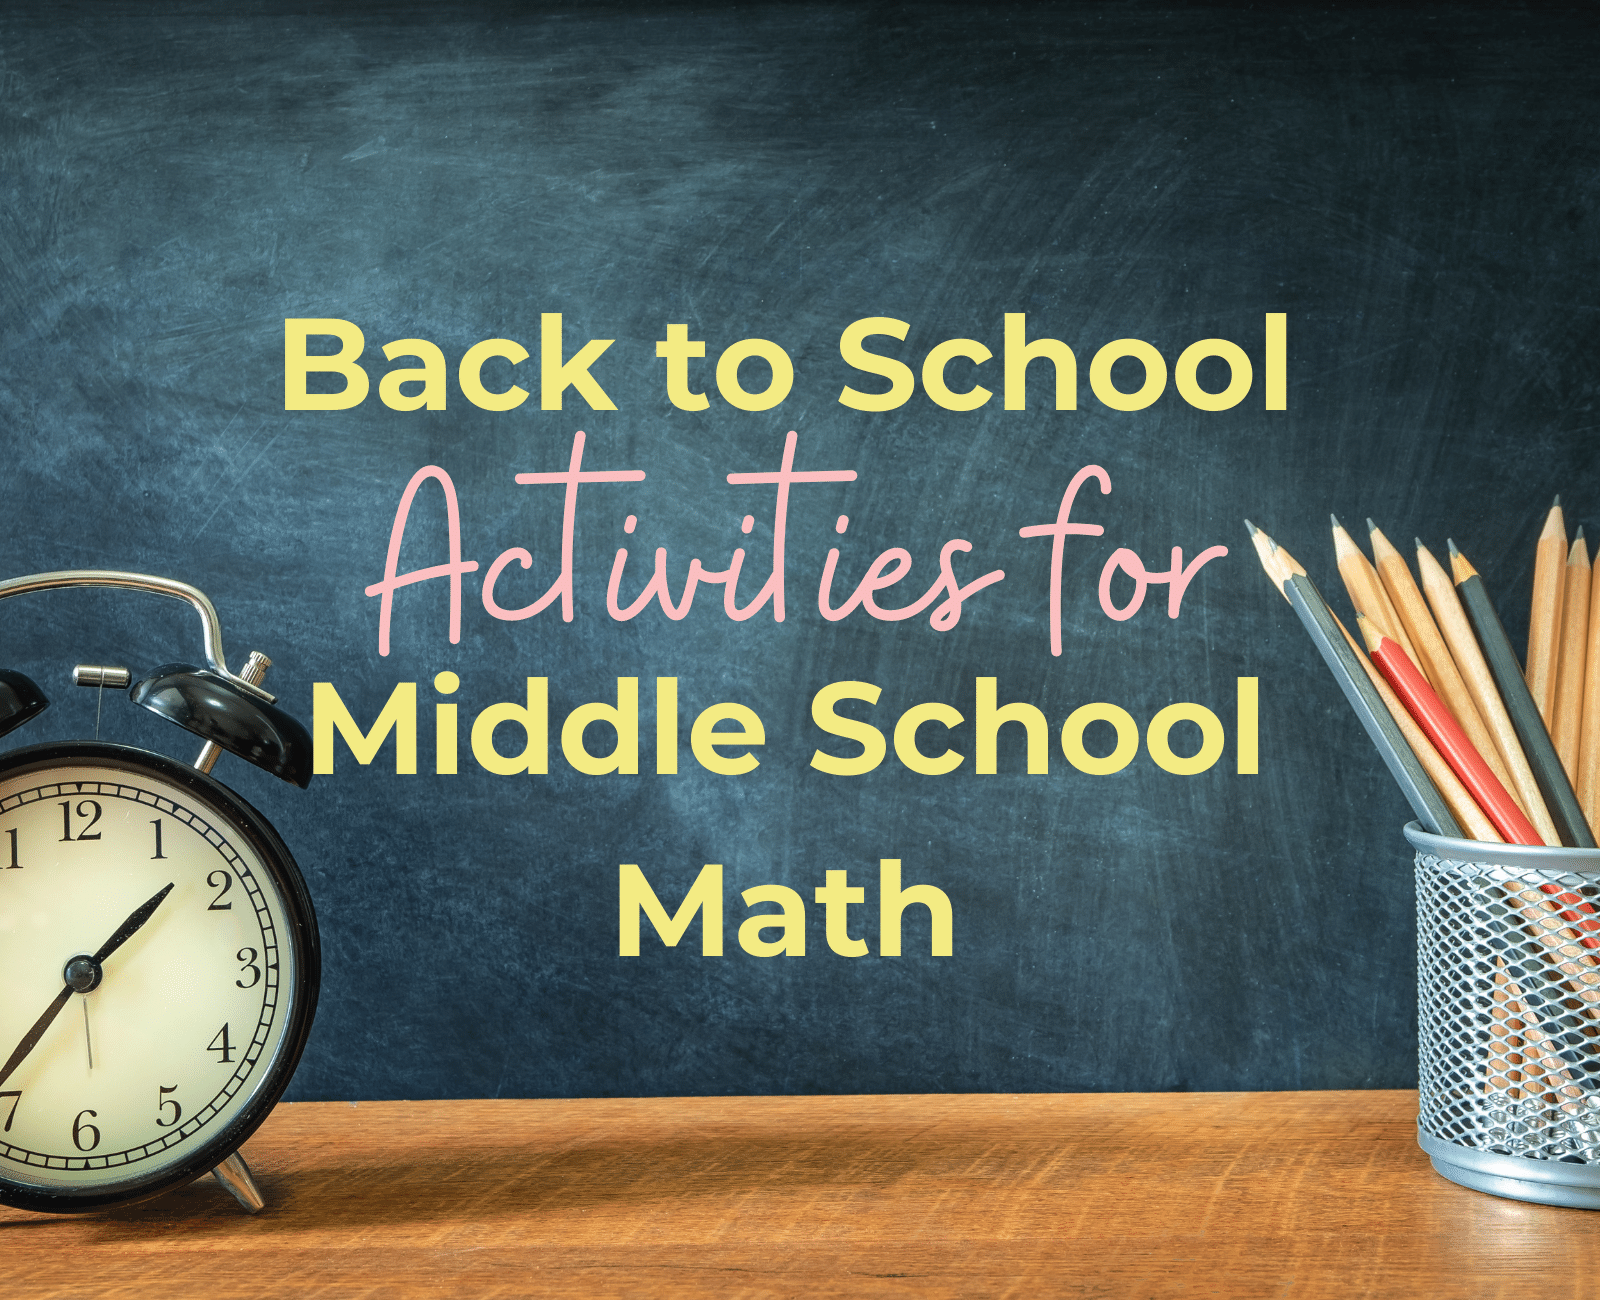 back-to-school-activities-for-middle-school-math-middle-school-math